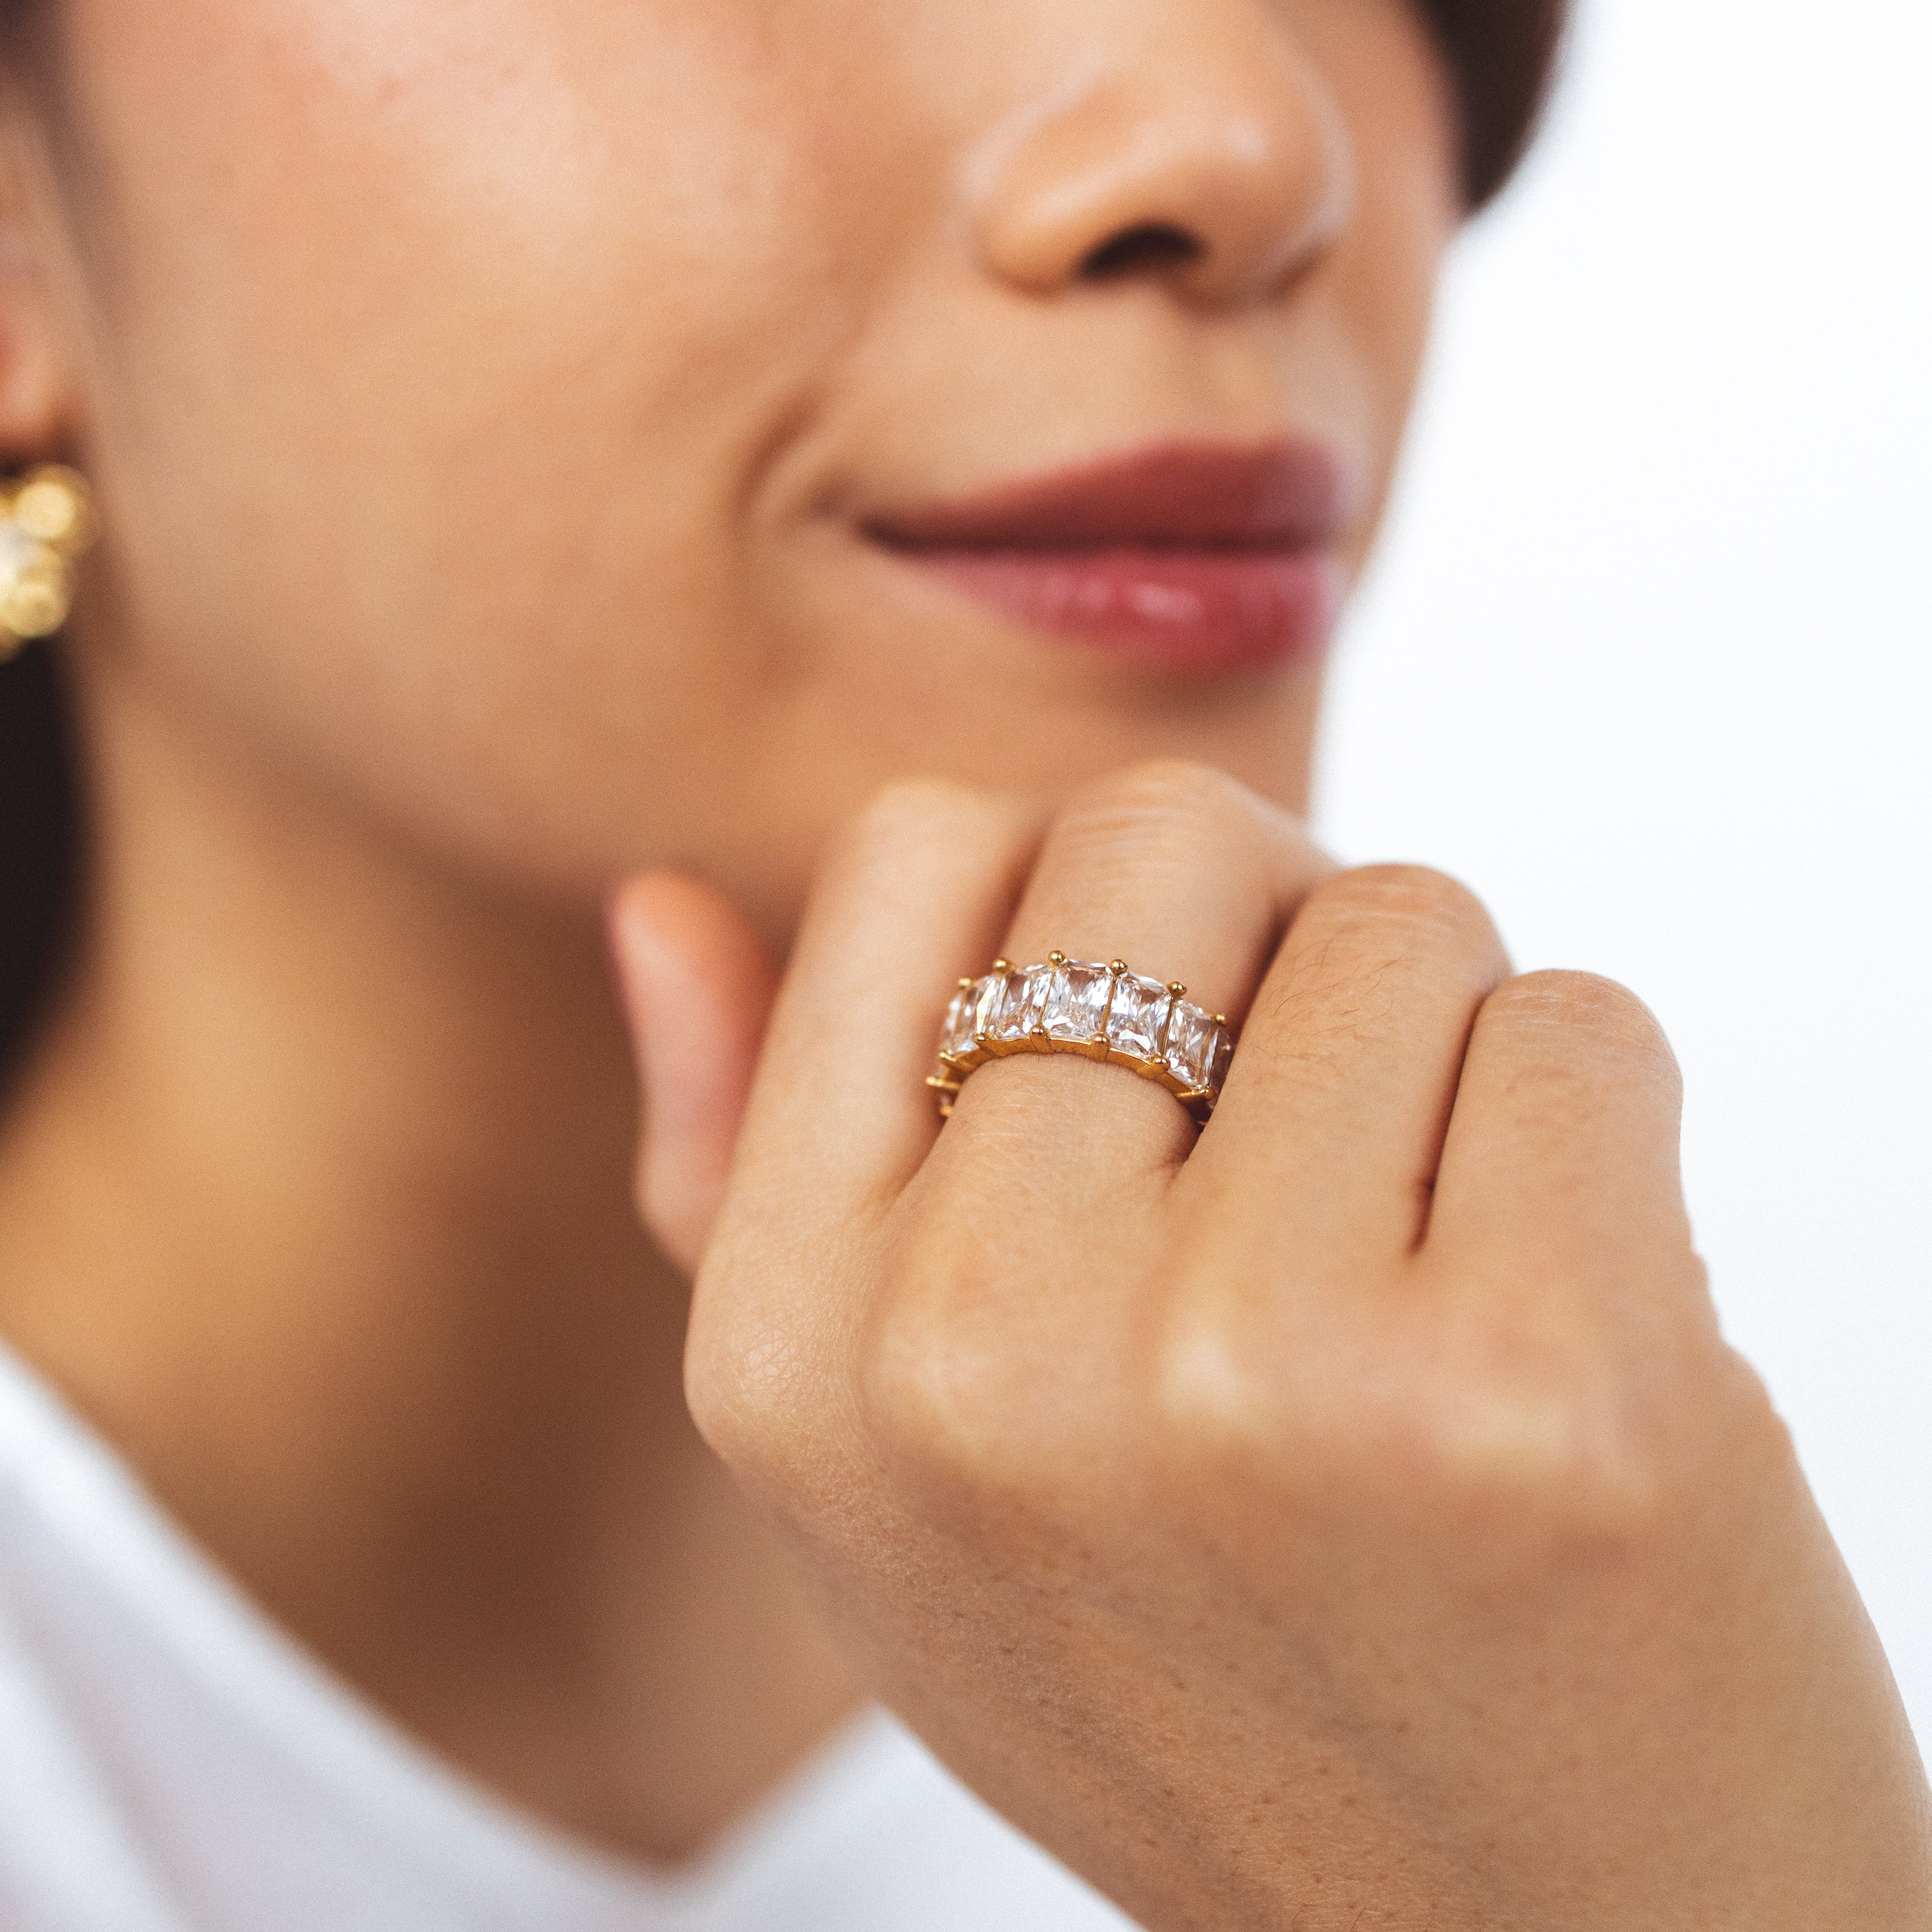 A model wearing the Jamie Ring boasts 18K gold plating over durable stainless steel for unrivaled resistance to tarnishing and water damage. Its sleek and timeless appeal is heightened by the non-adjustable design, making it the perfect single ring for any occasion.